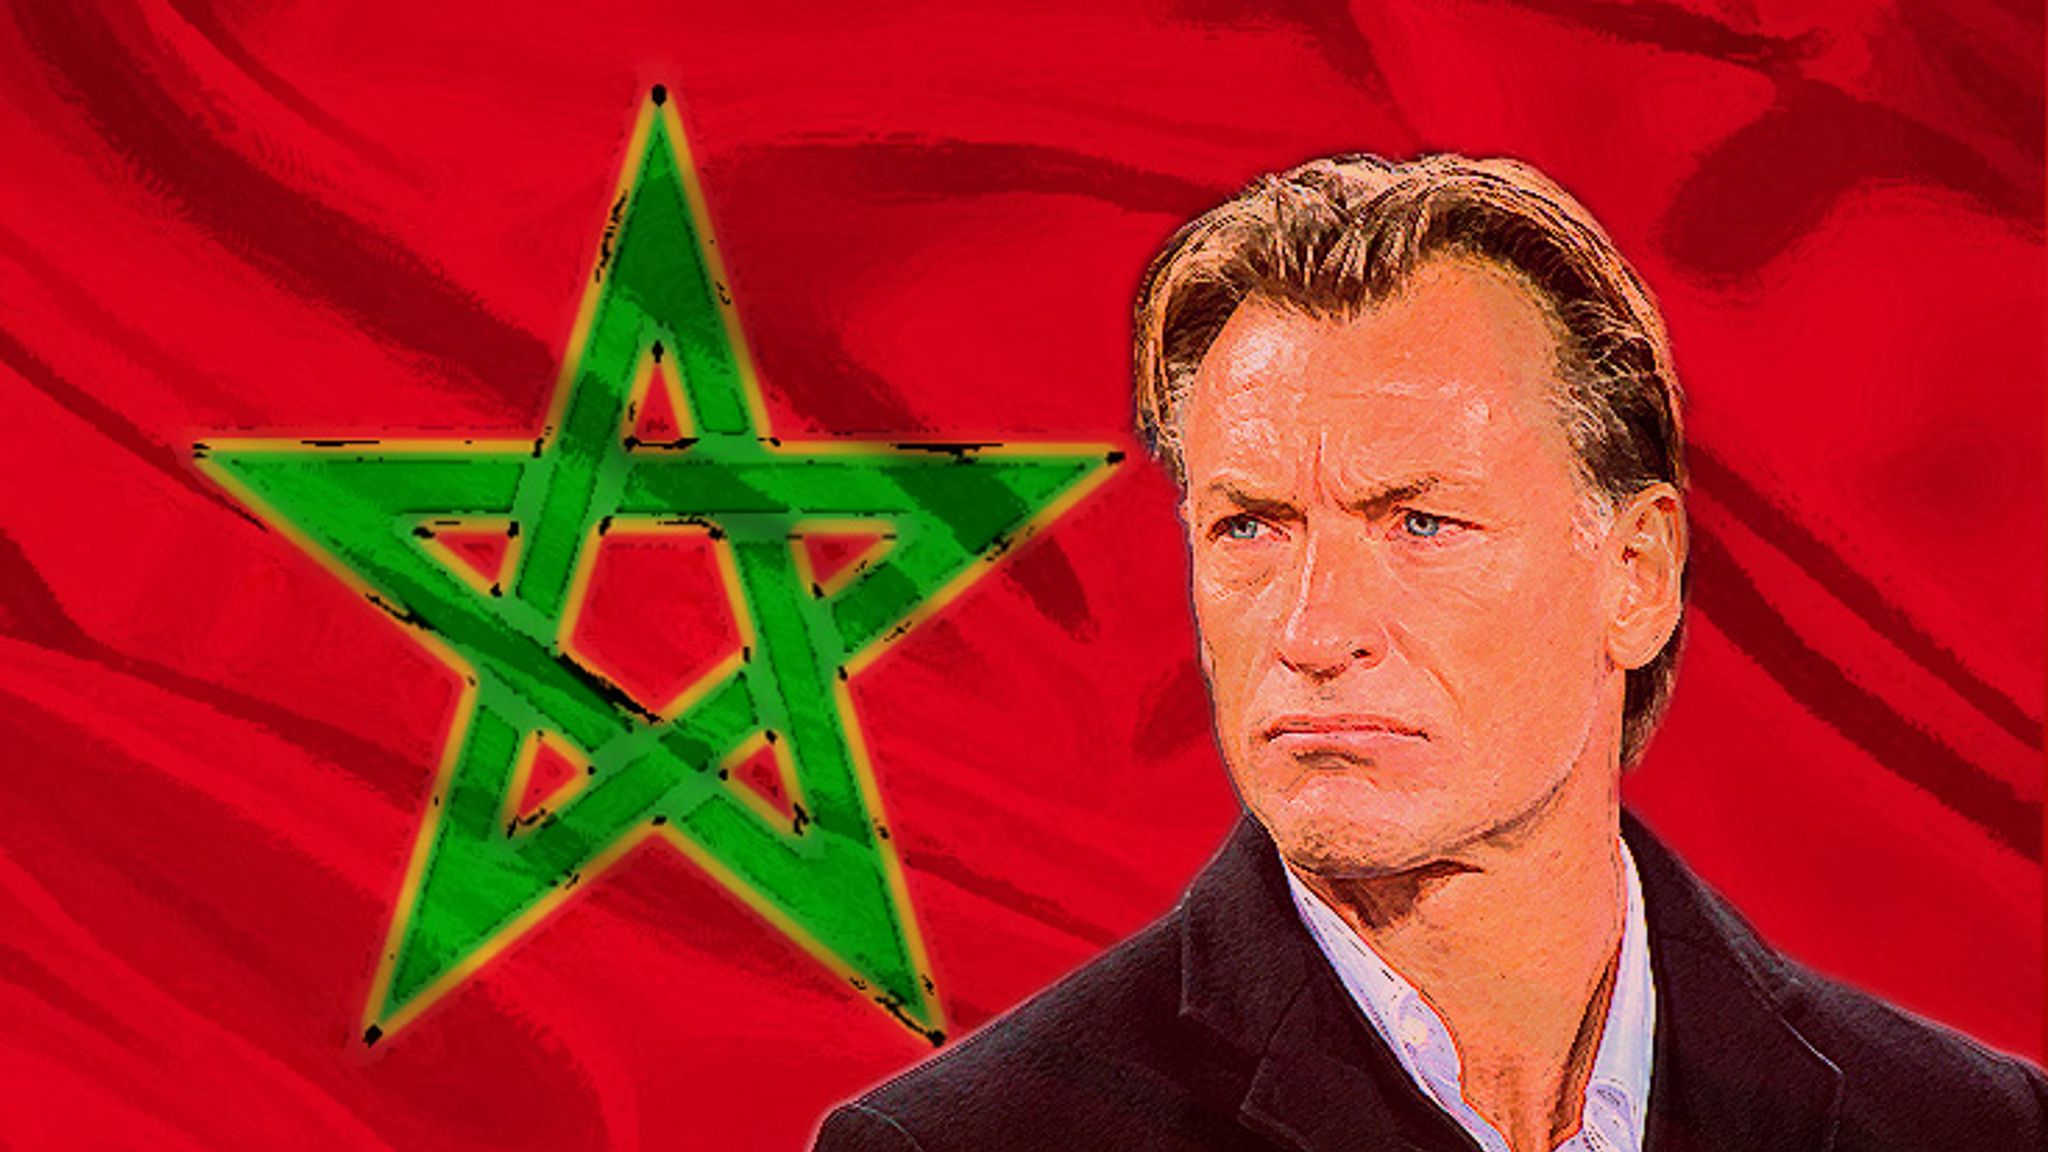 From Cambridge to Qatar: How Herve Renard went from League Two to